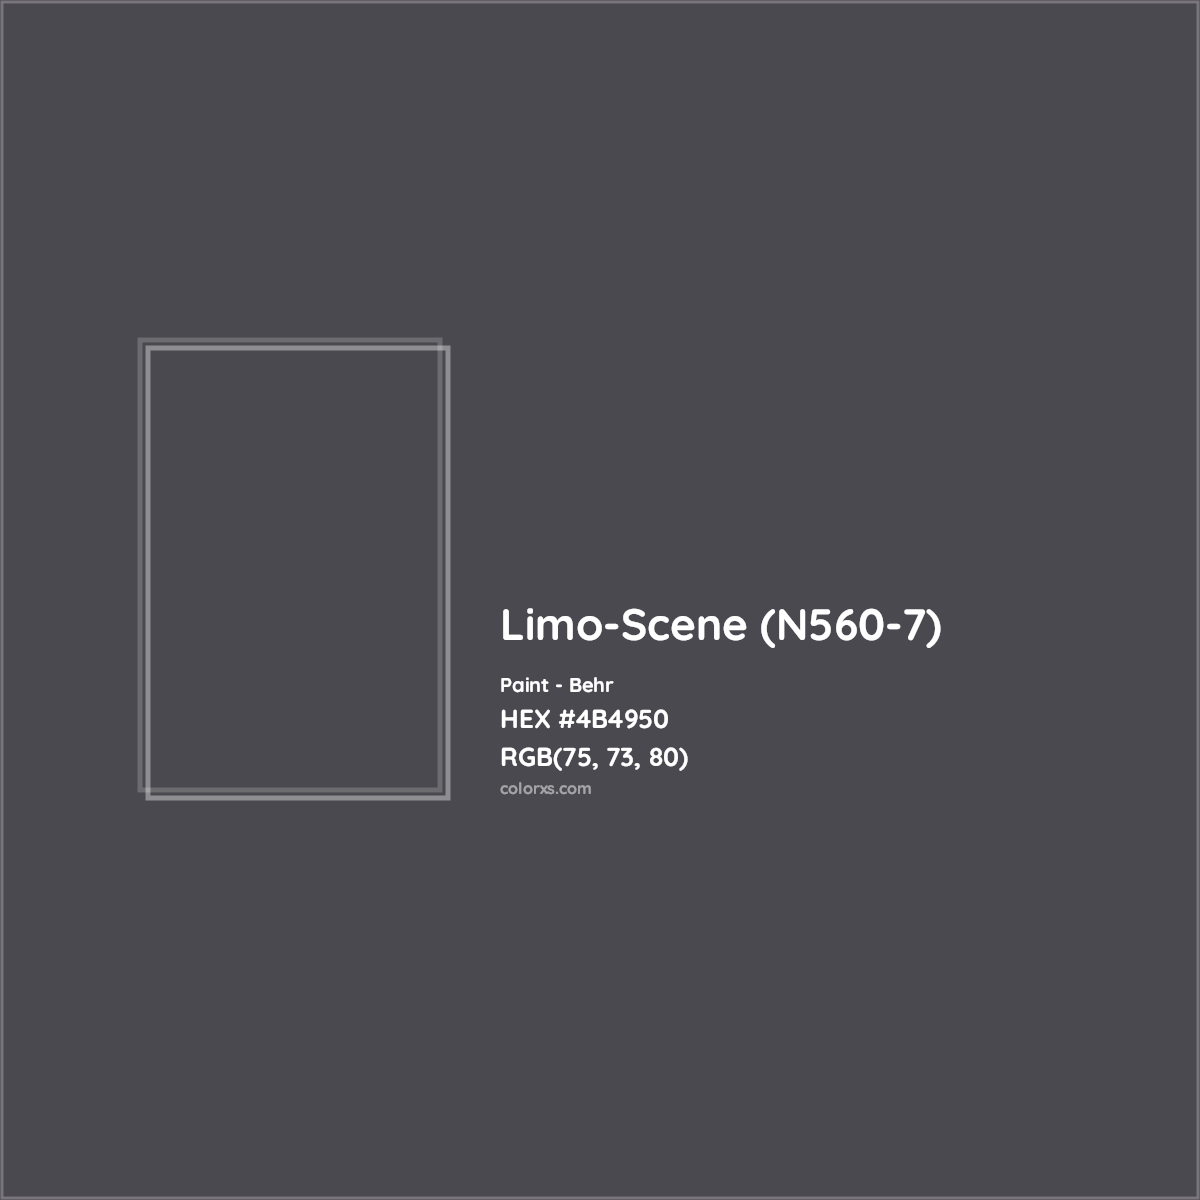 HEX #4B4950 Limo-Scene (N560-7) Paint Behr - Color Code